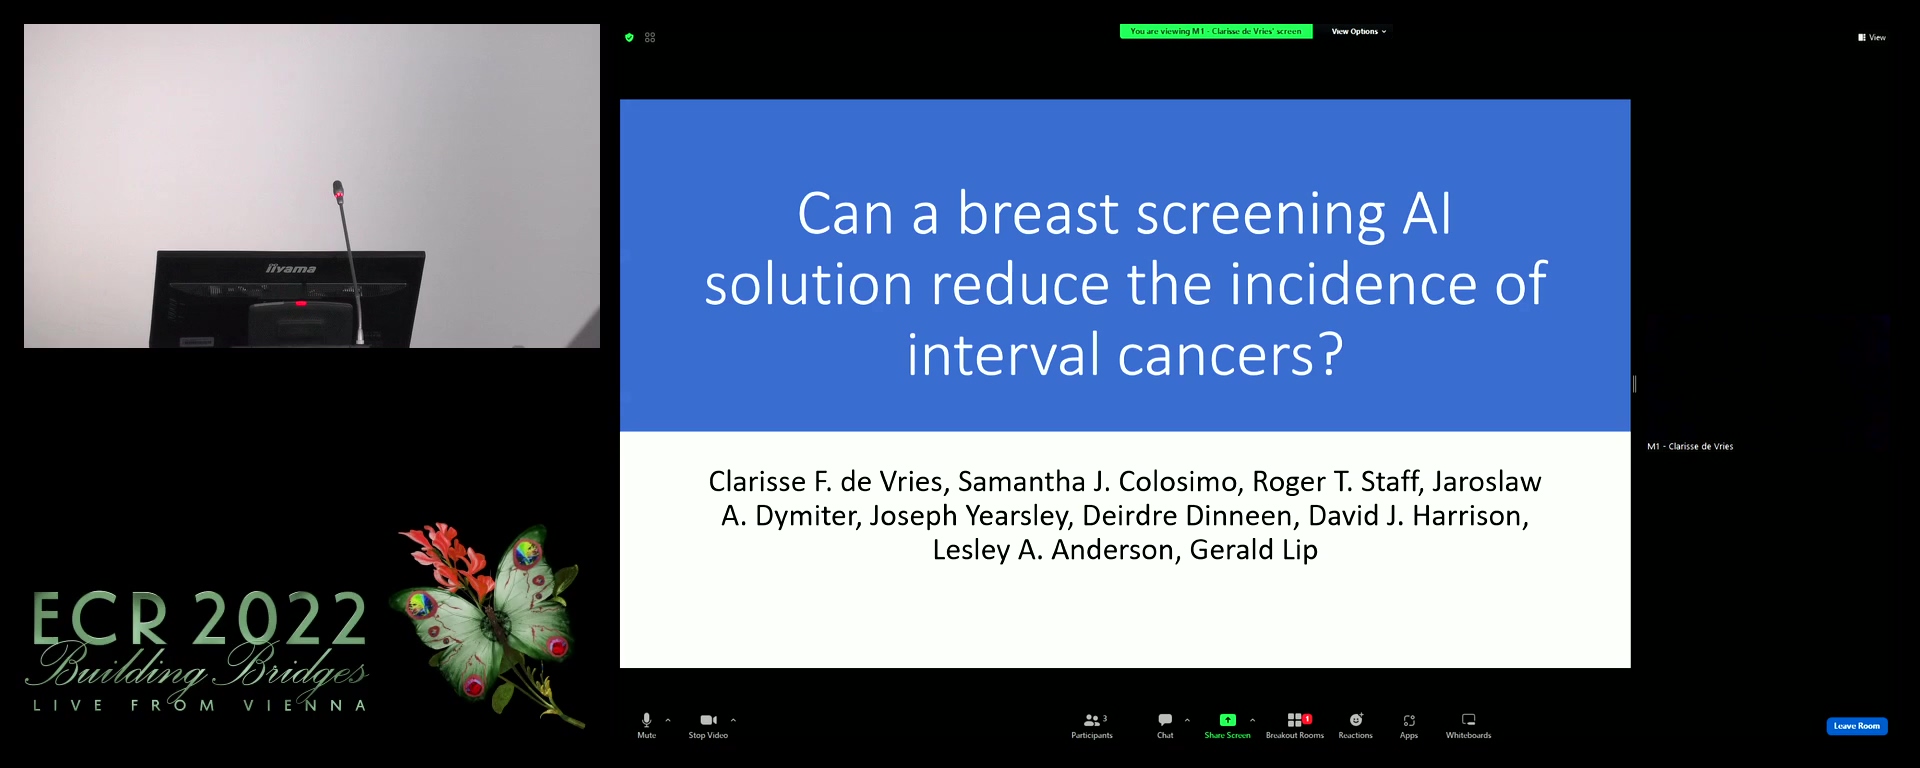 Can a breast-screening AI solution reduce the incidence of interval cancers?